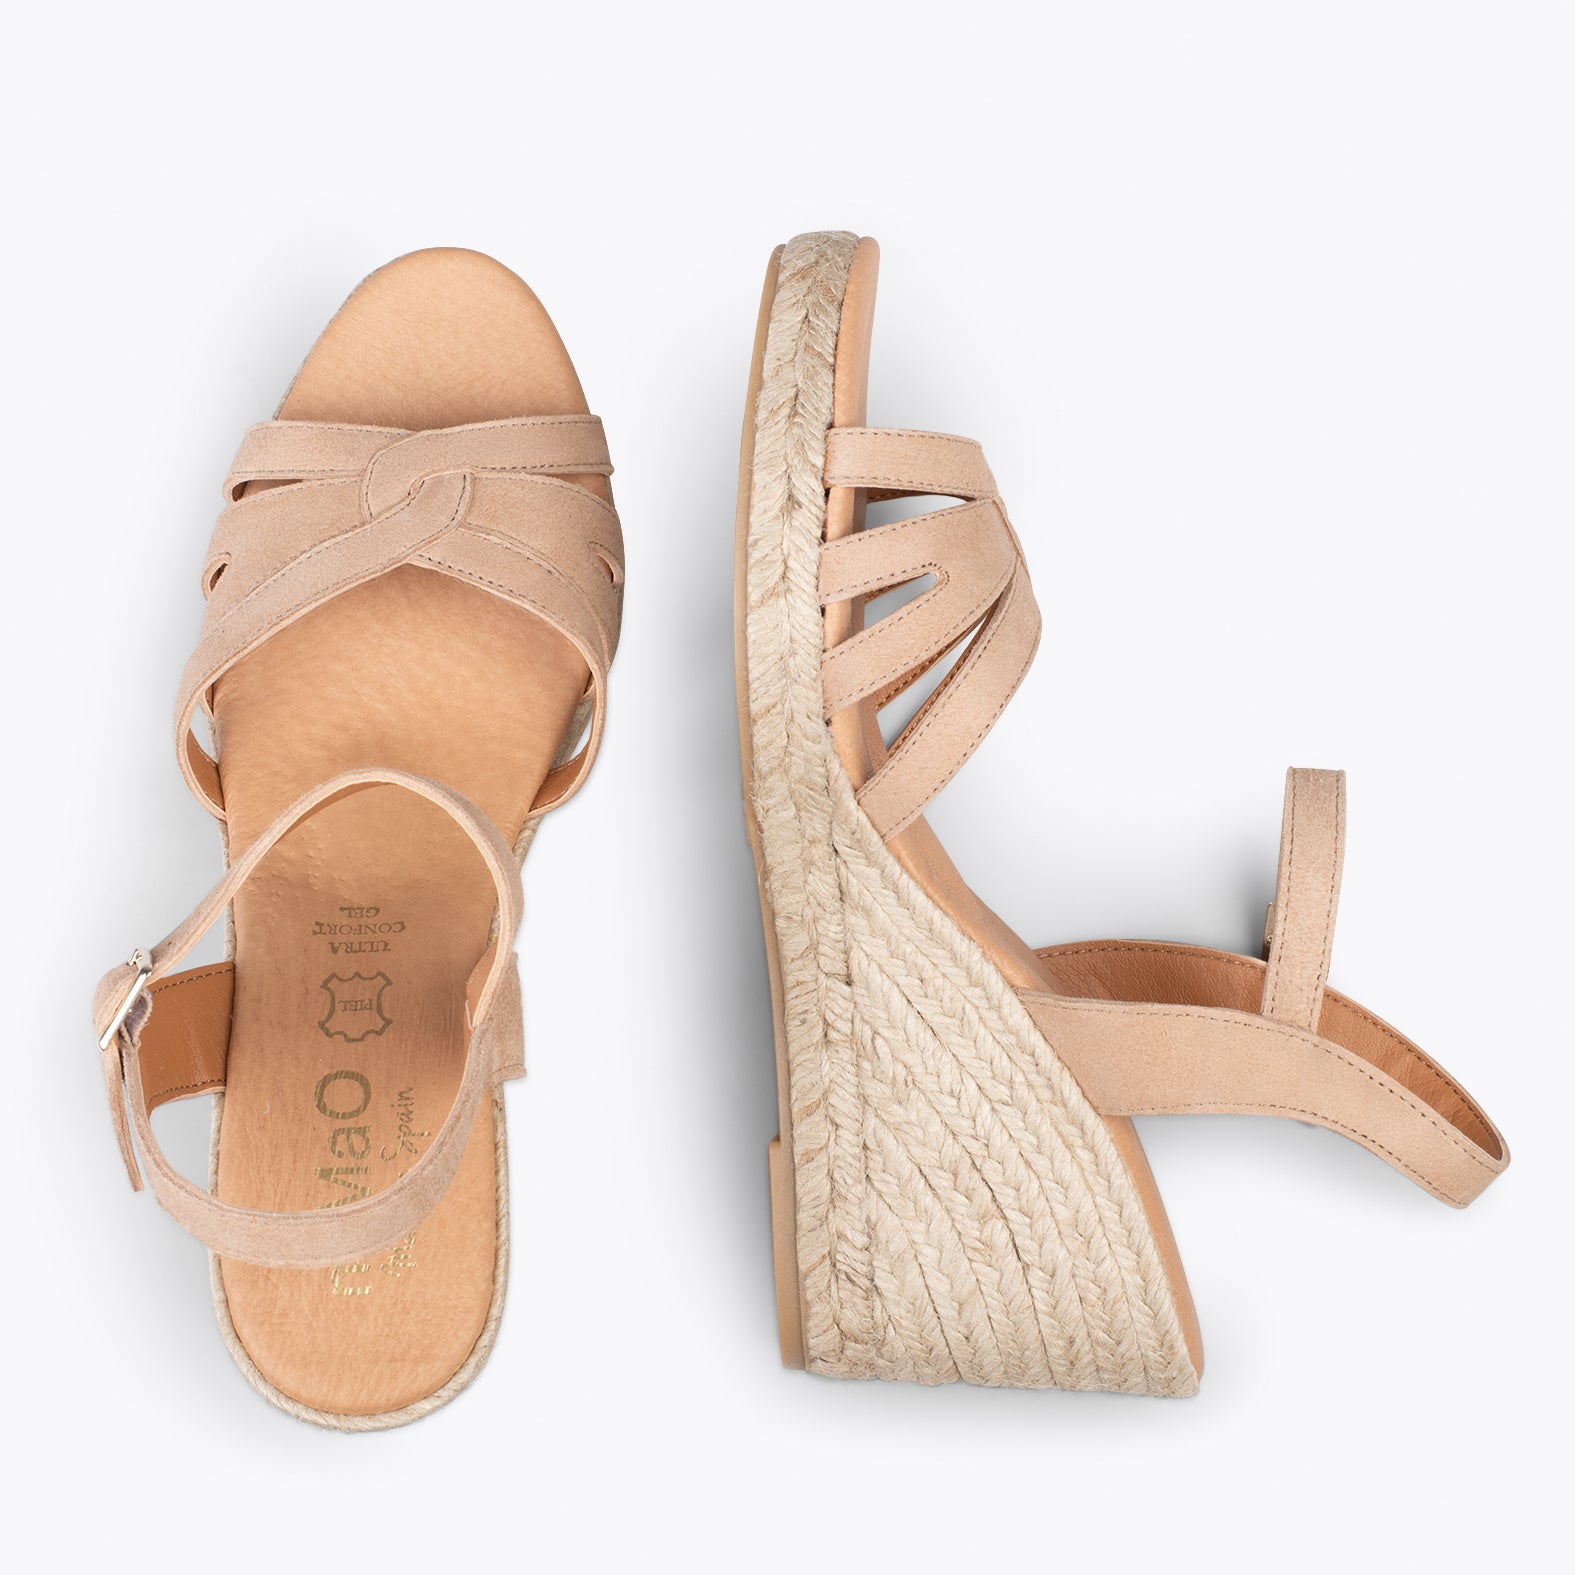 HOYAMBRE – BEIGE espadrilles with braided front